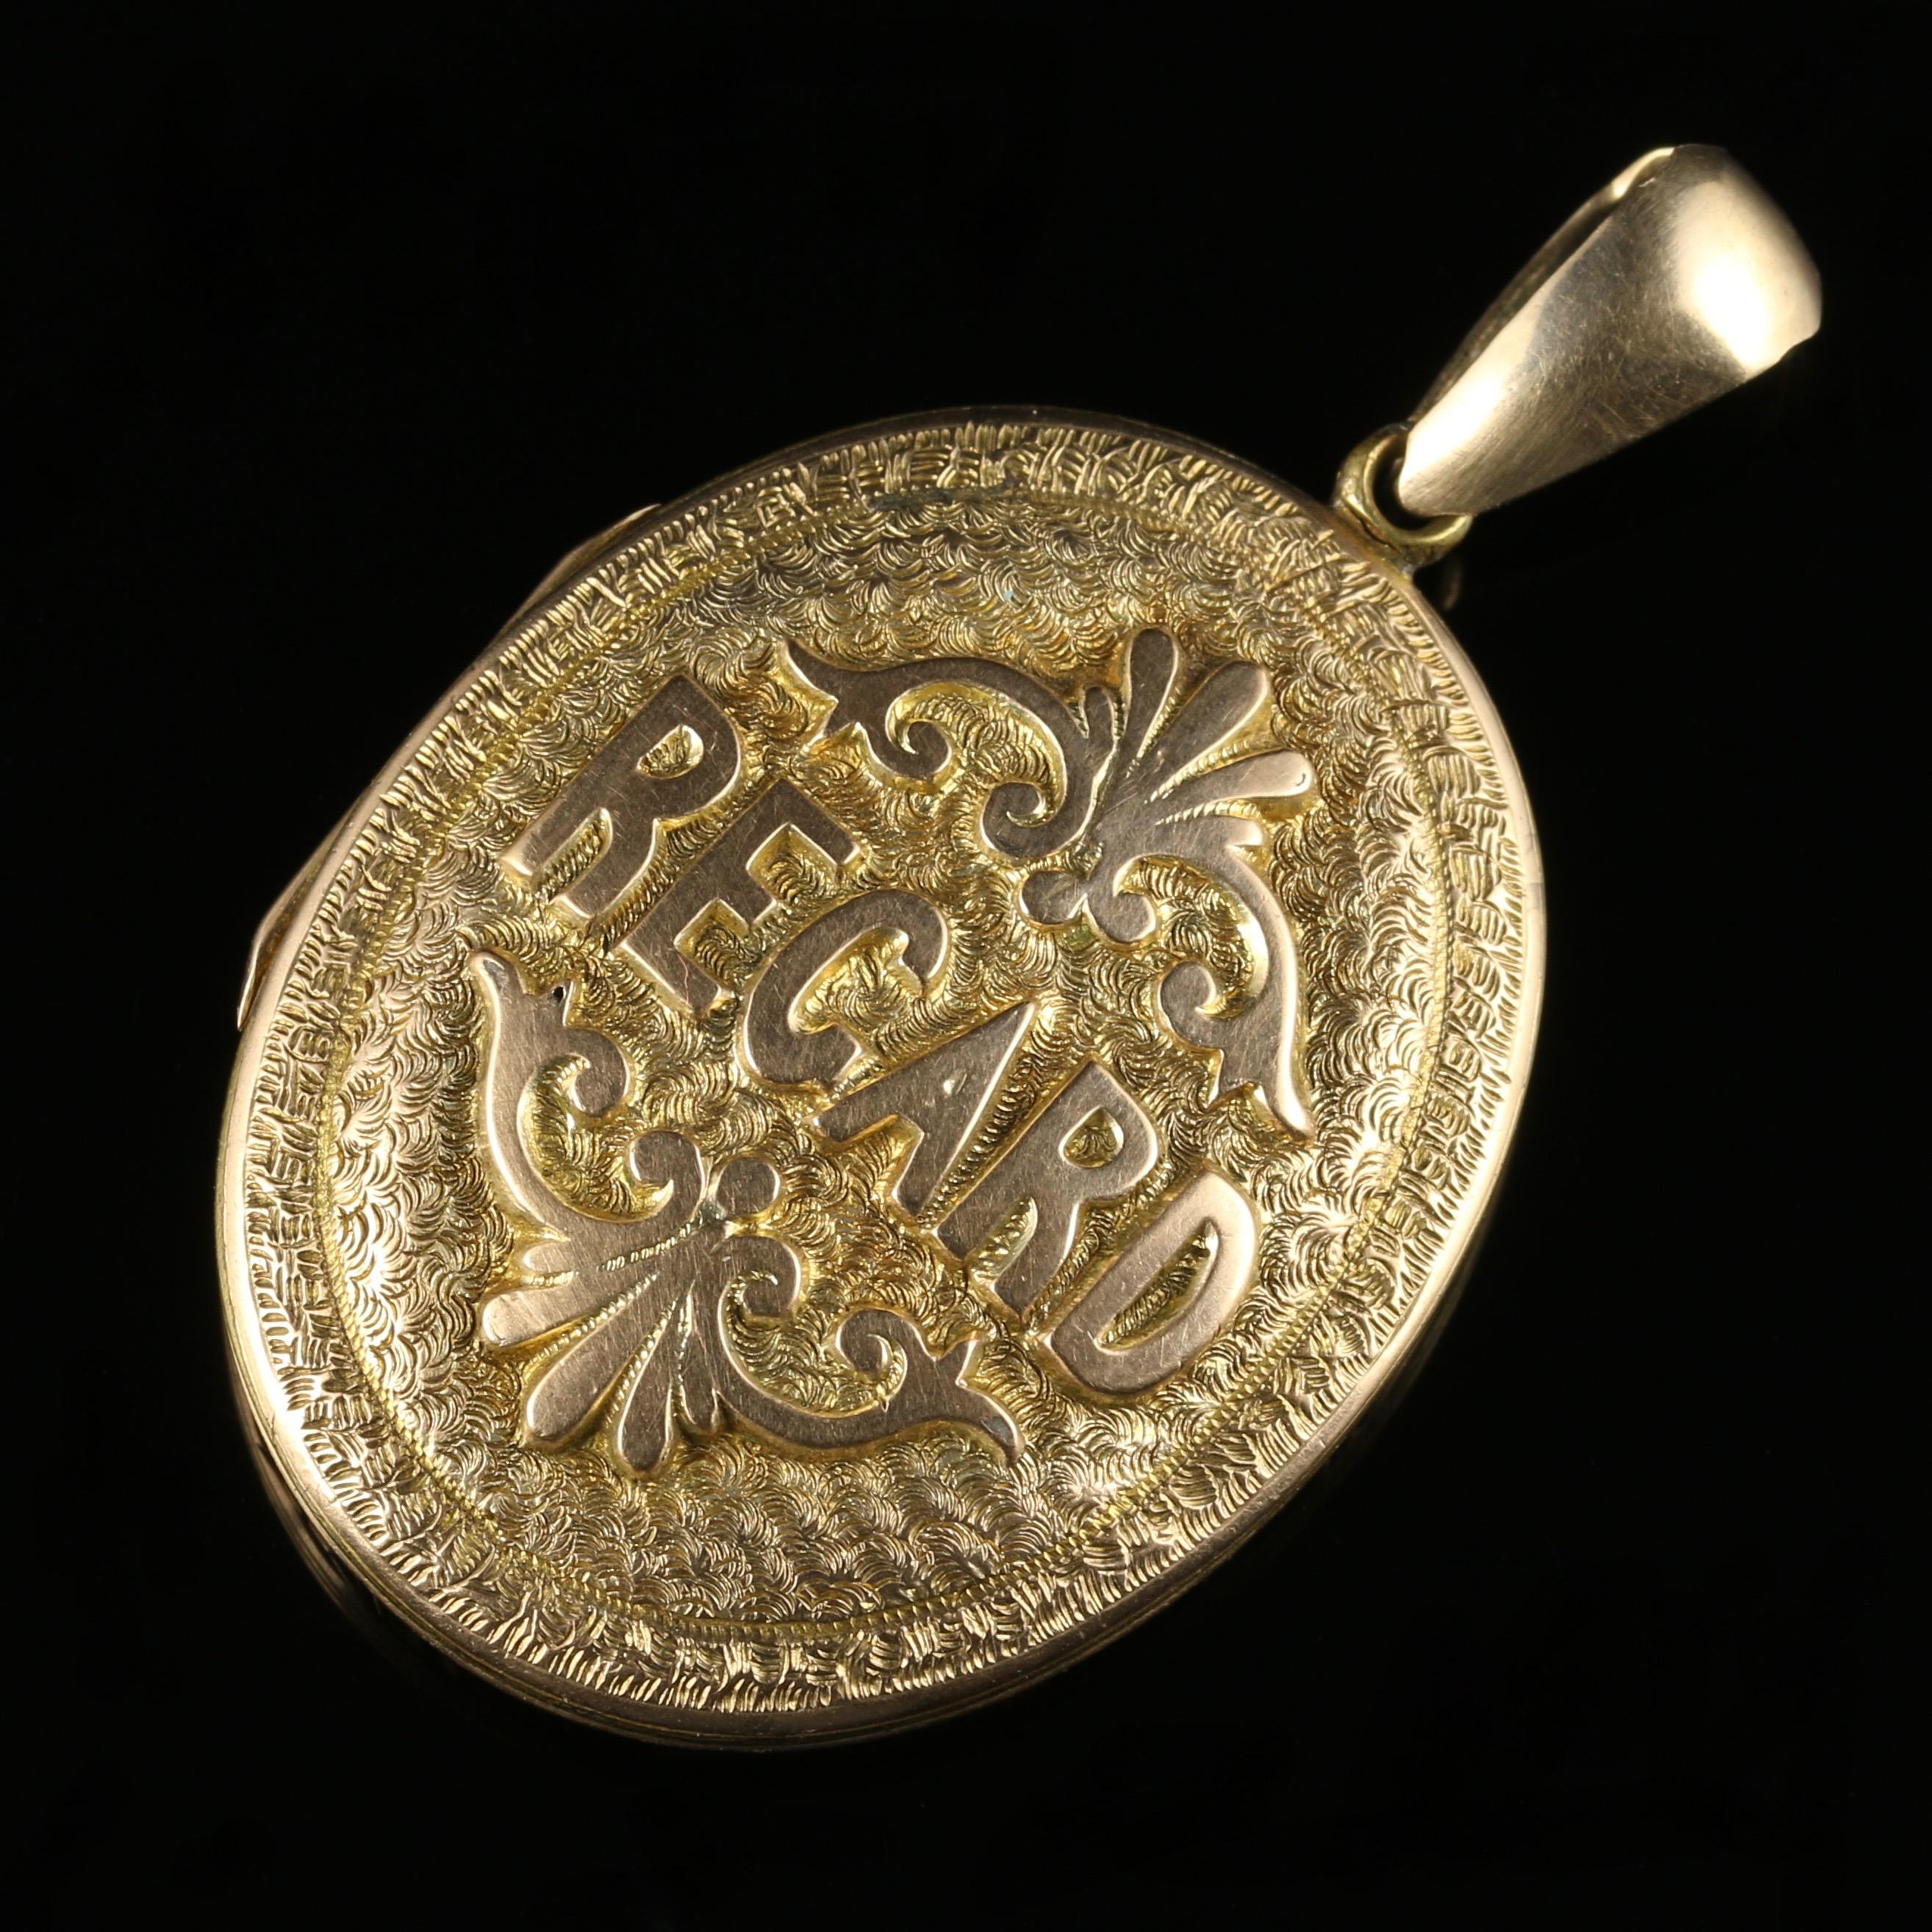 For more details please click continue reading down below...

This wonderful antique Victorian locket is a lovely original 